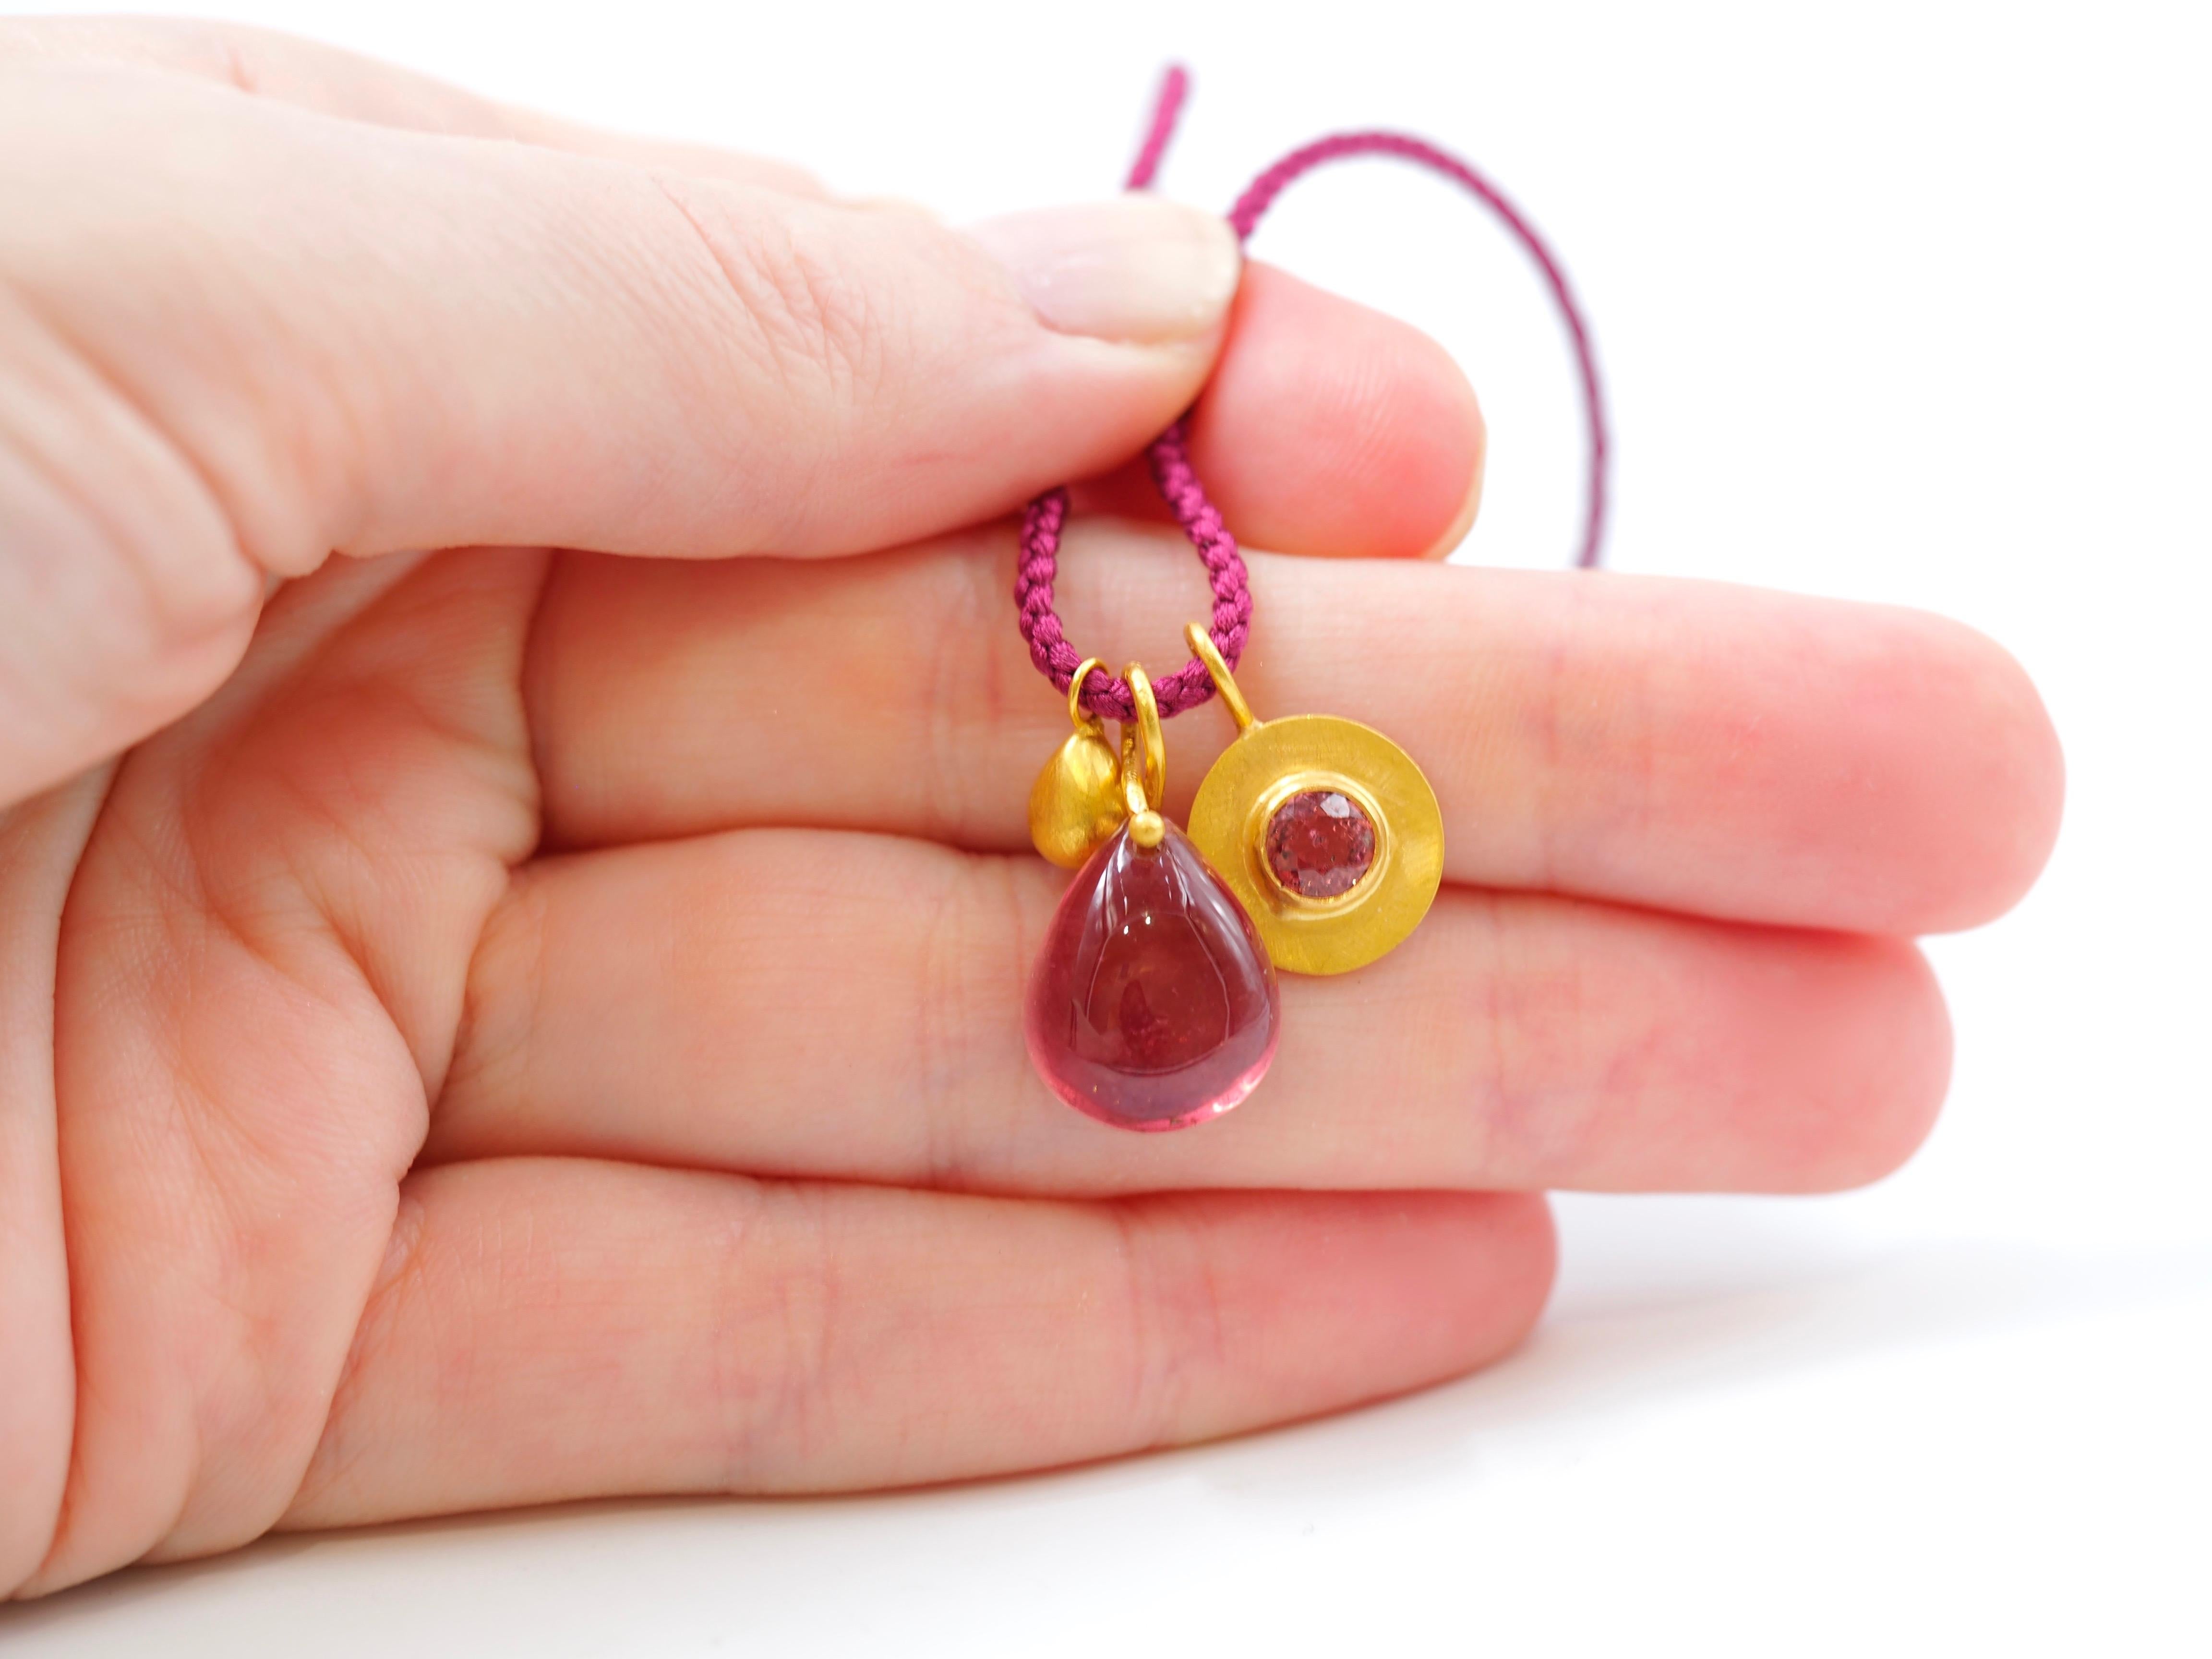 This necklace is composed of 3 pendants on a long braided silk rope:
- a large purple tourmaline drop cabochon of 10.35 cts
- a medium gold 22kt drop
- a gold disk with a purple spinel of approx 1 carat (12mm diameter)

A 22cts gold chain can also